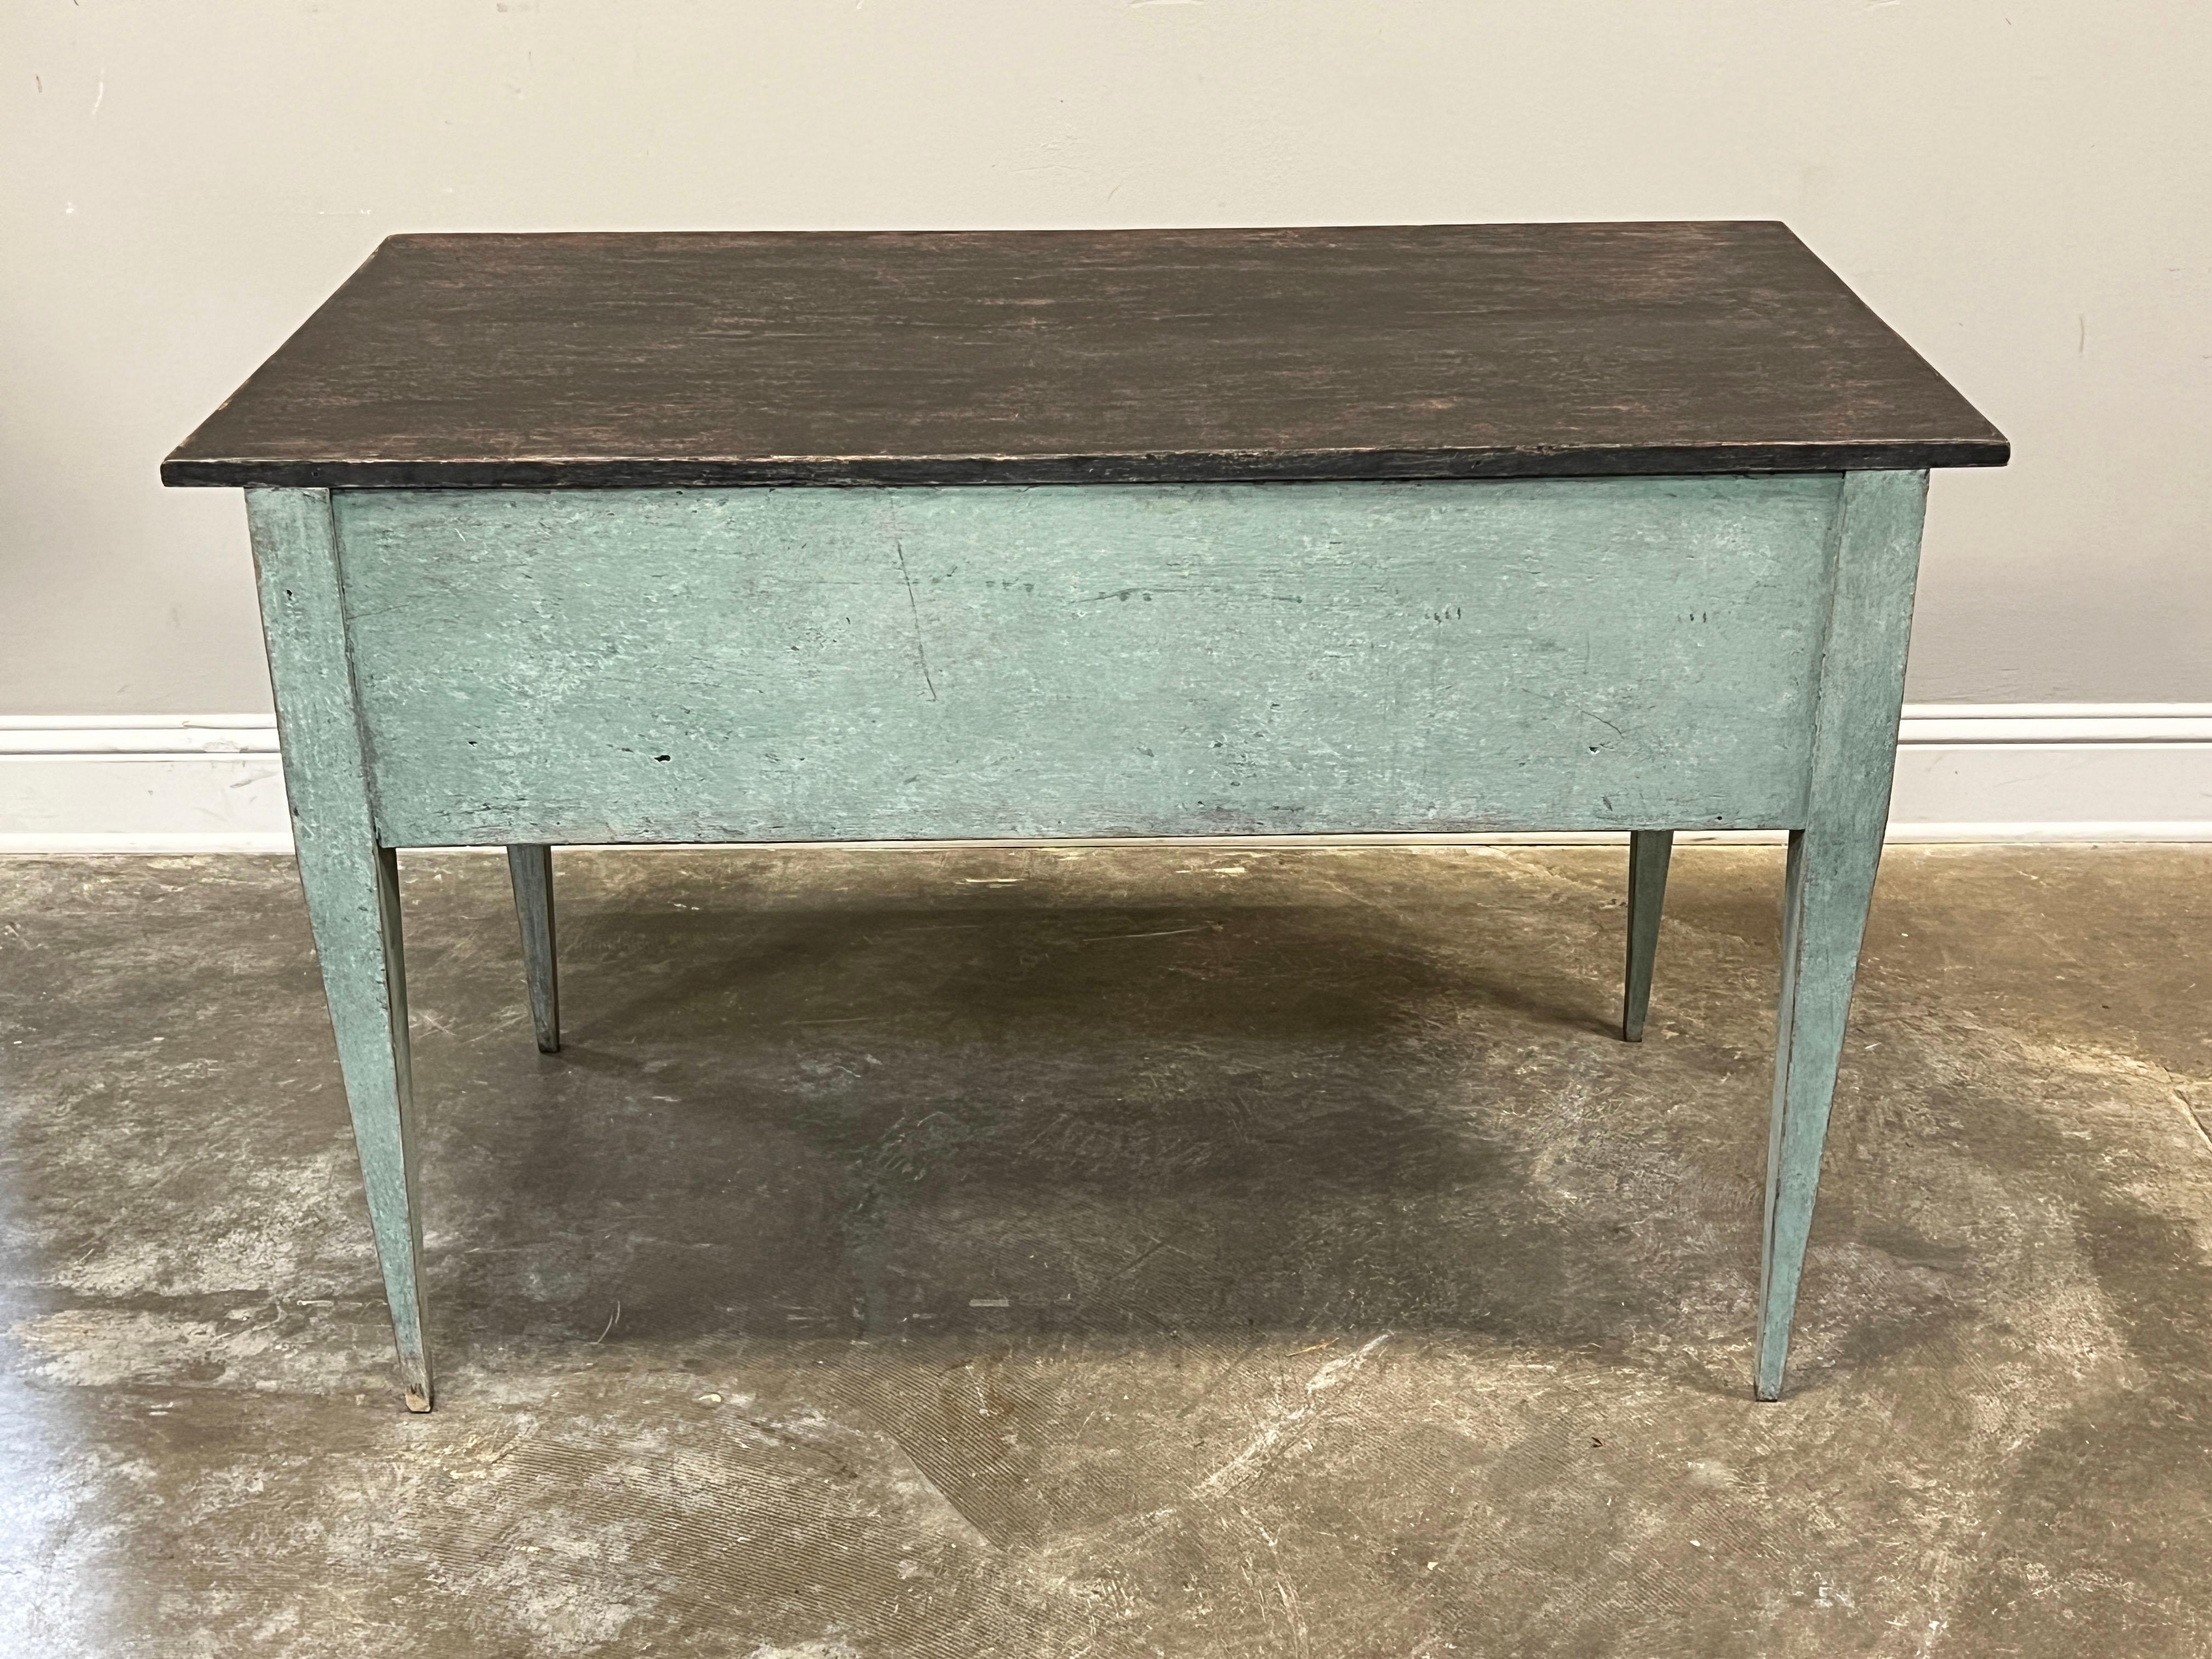 Beautifully painted in a contemporary turquoise, this Swedish Gustavian style desk is handmade with mortise joints and dovetailed drawers.

On each drawer there is horizontal fluting with brass hardware and classic tapered legs.

Leg opening 17